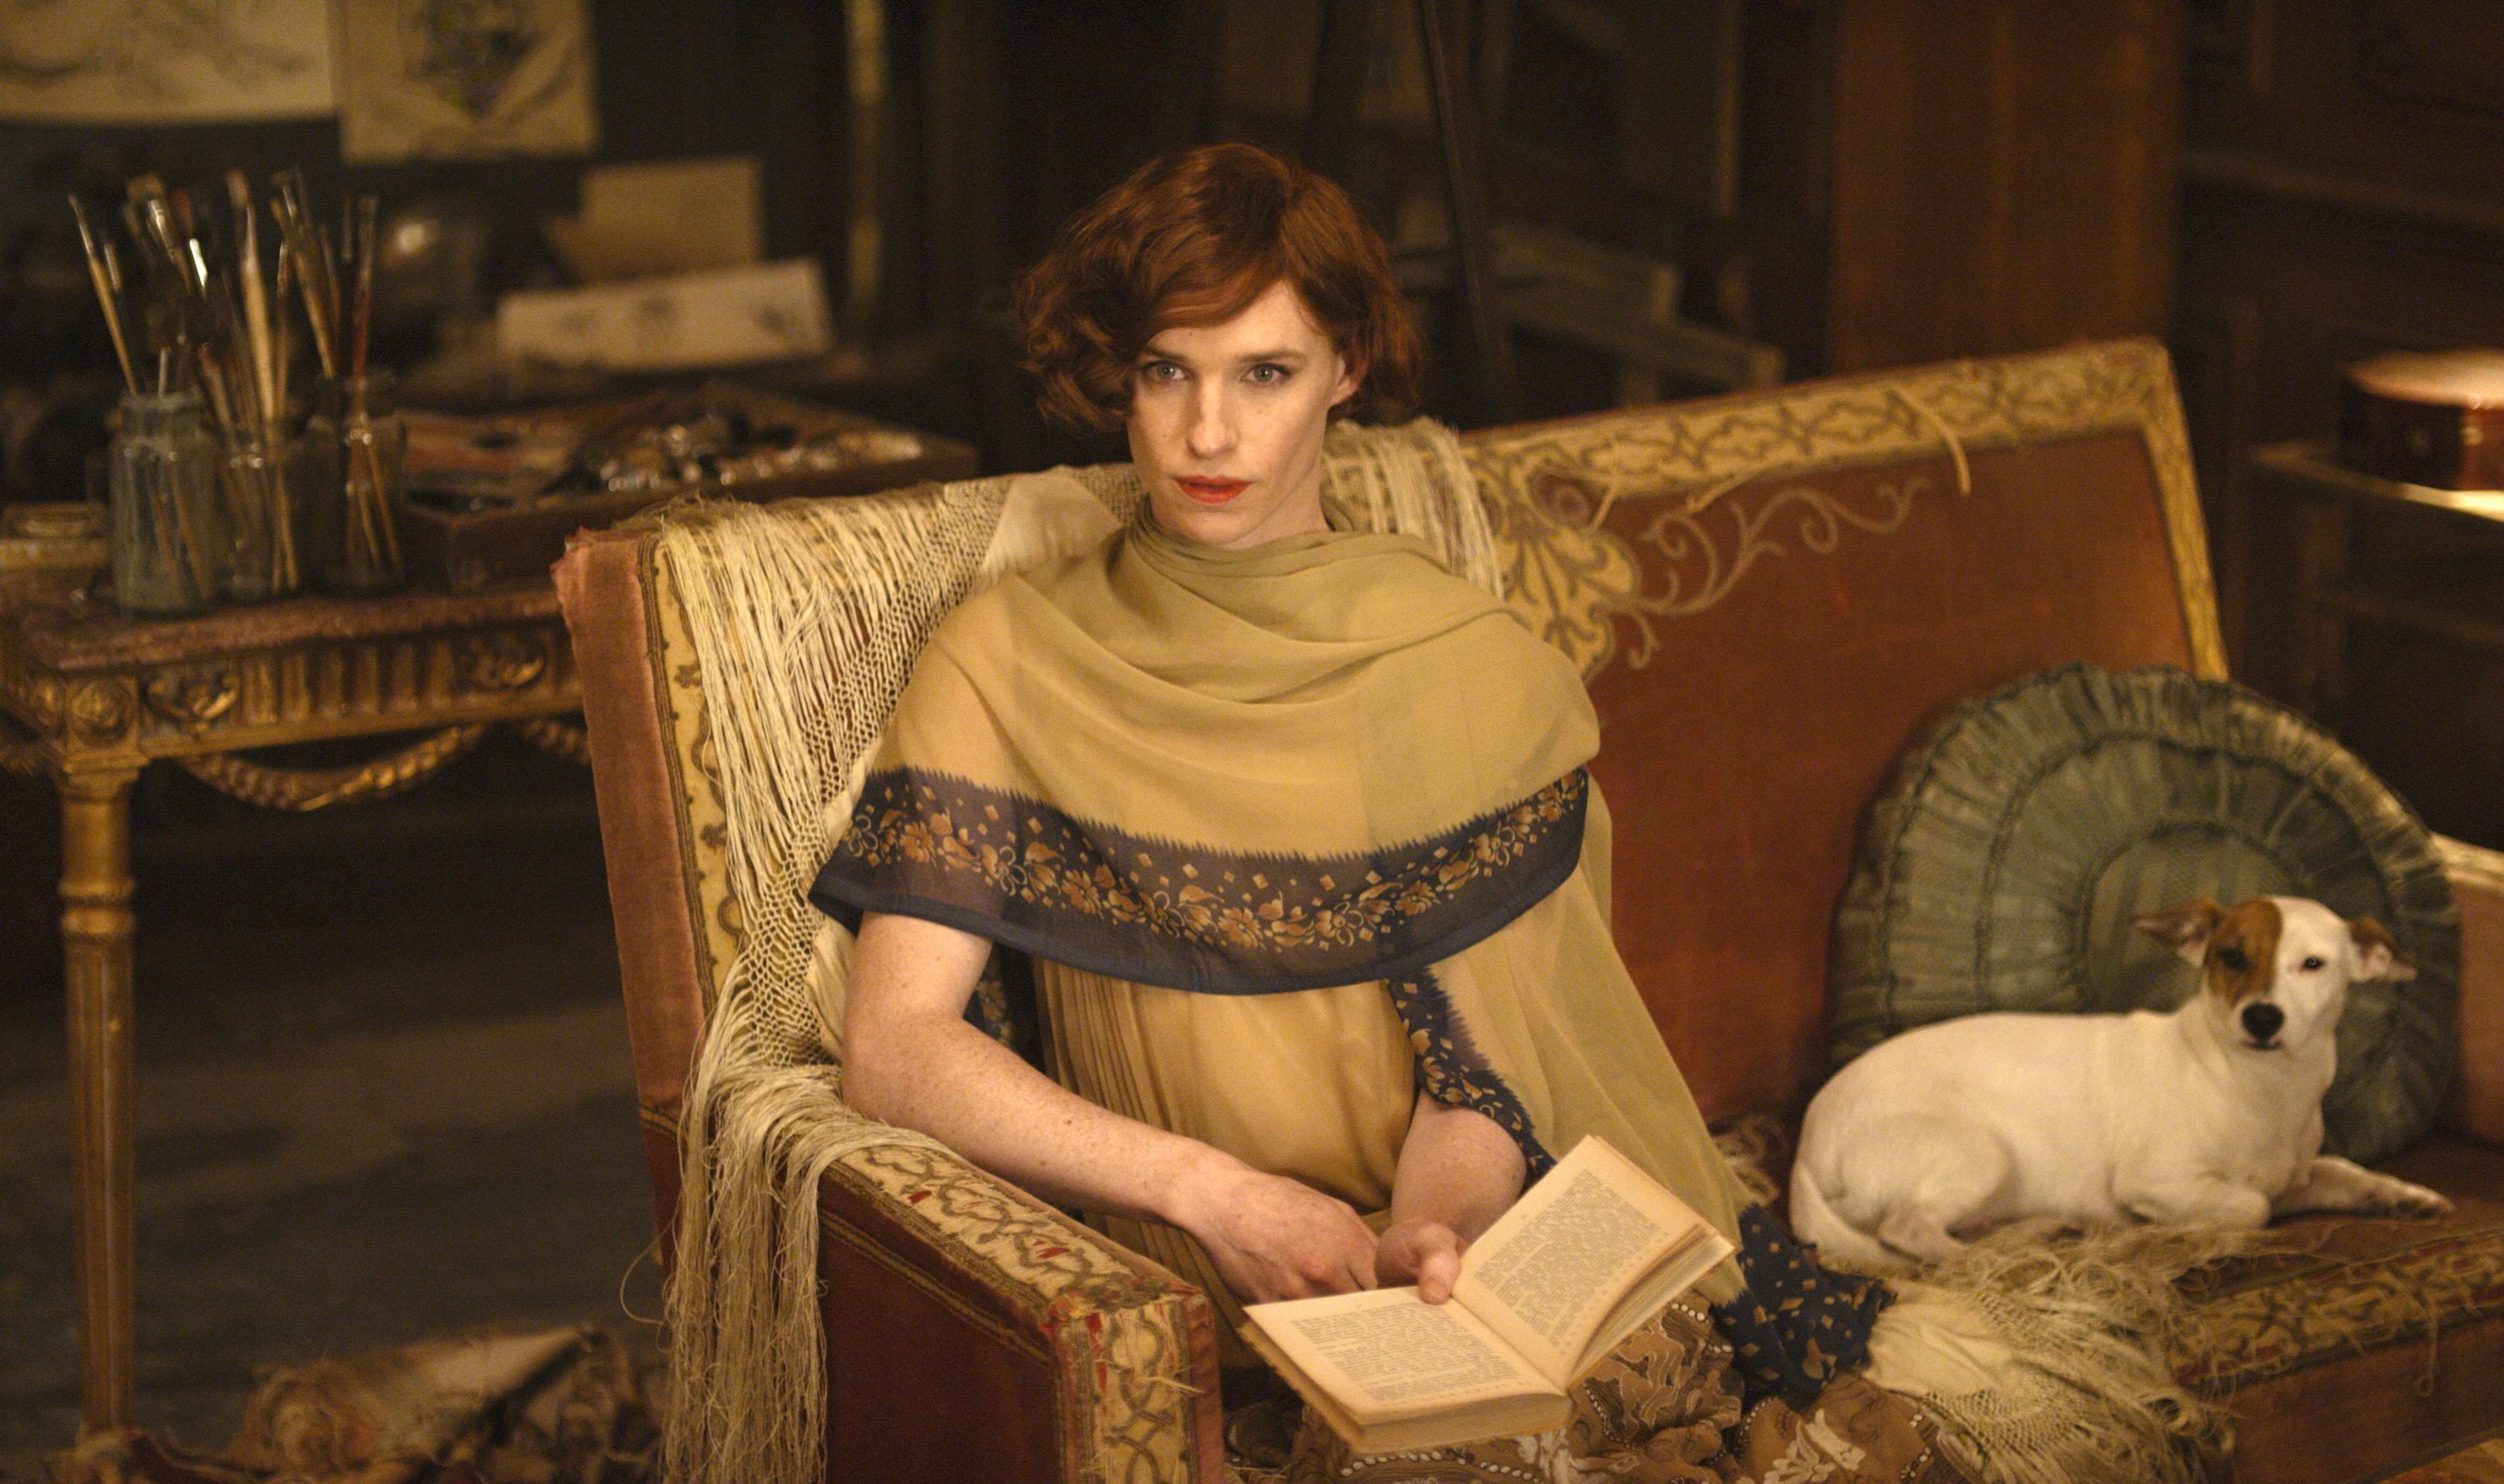 Eddie Redmayne stars in &quot;The Danish Girl.&quot; The good news for those trying to catch up on Oscar-nominated flicks: A little more than half are available for streaming online. &quot;Creed&quot; and &quot;The Danish Girl&quot; are available for purchase; iTunes says &quot;The Danish Girl&quot; can also be rented starting Tuesday.